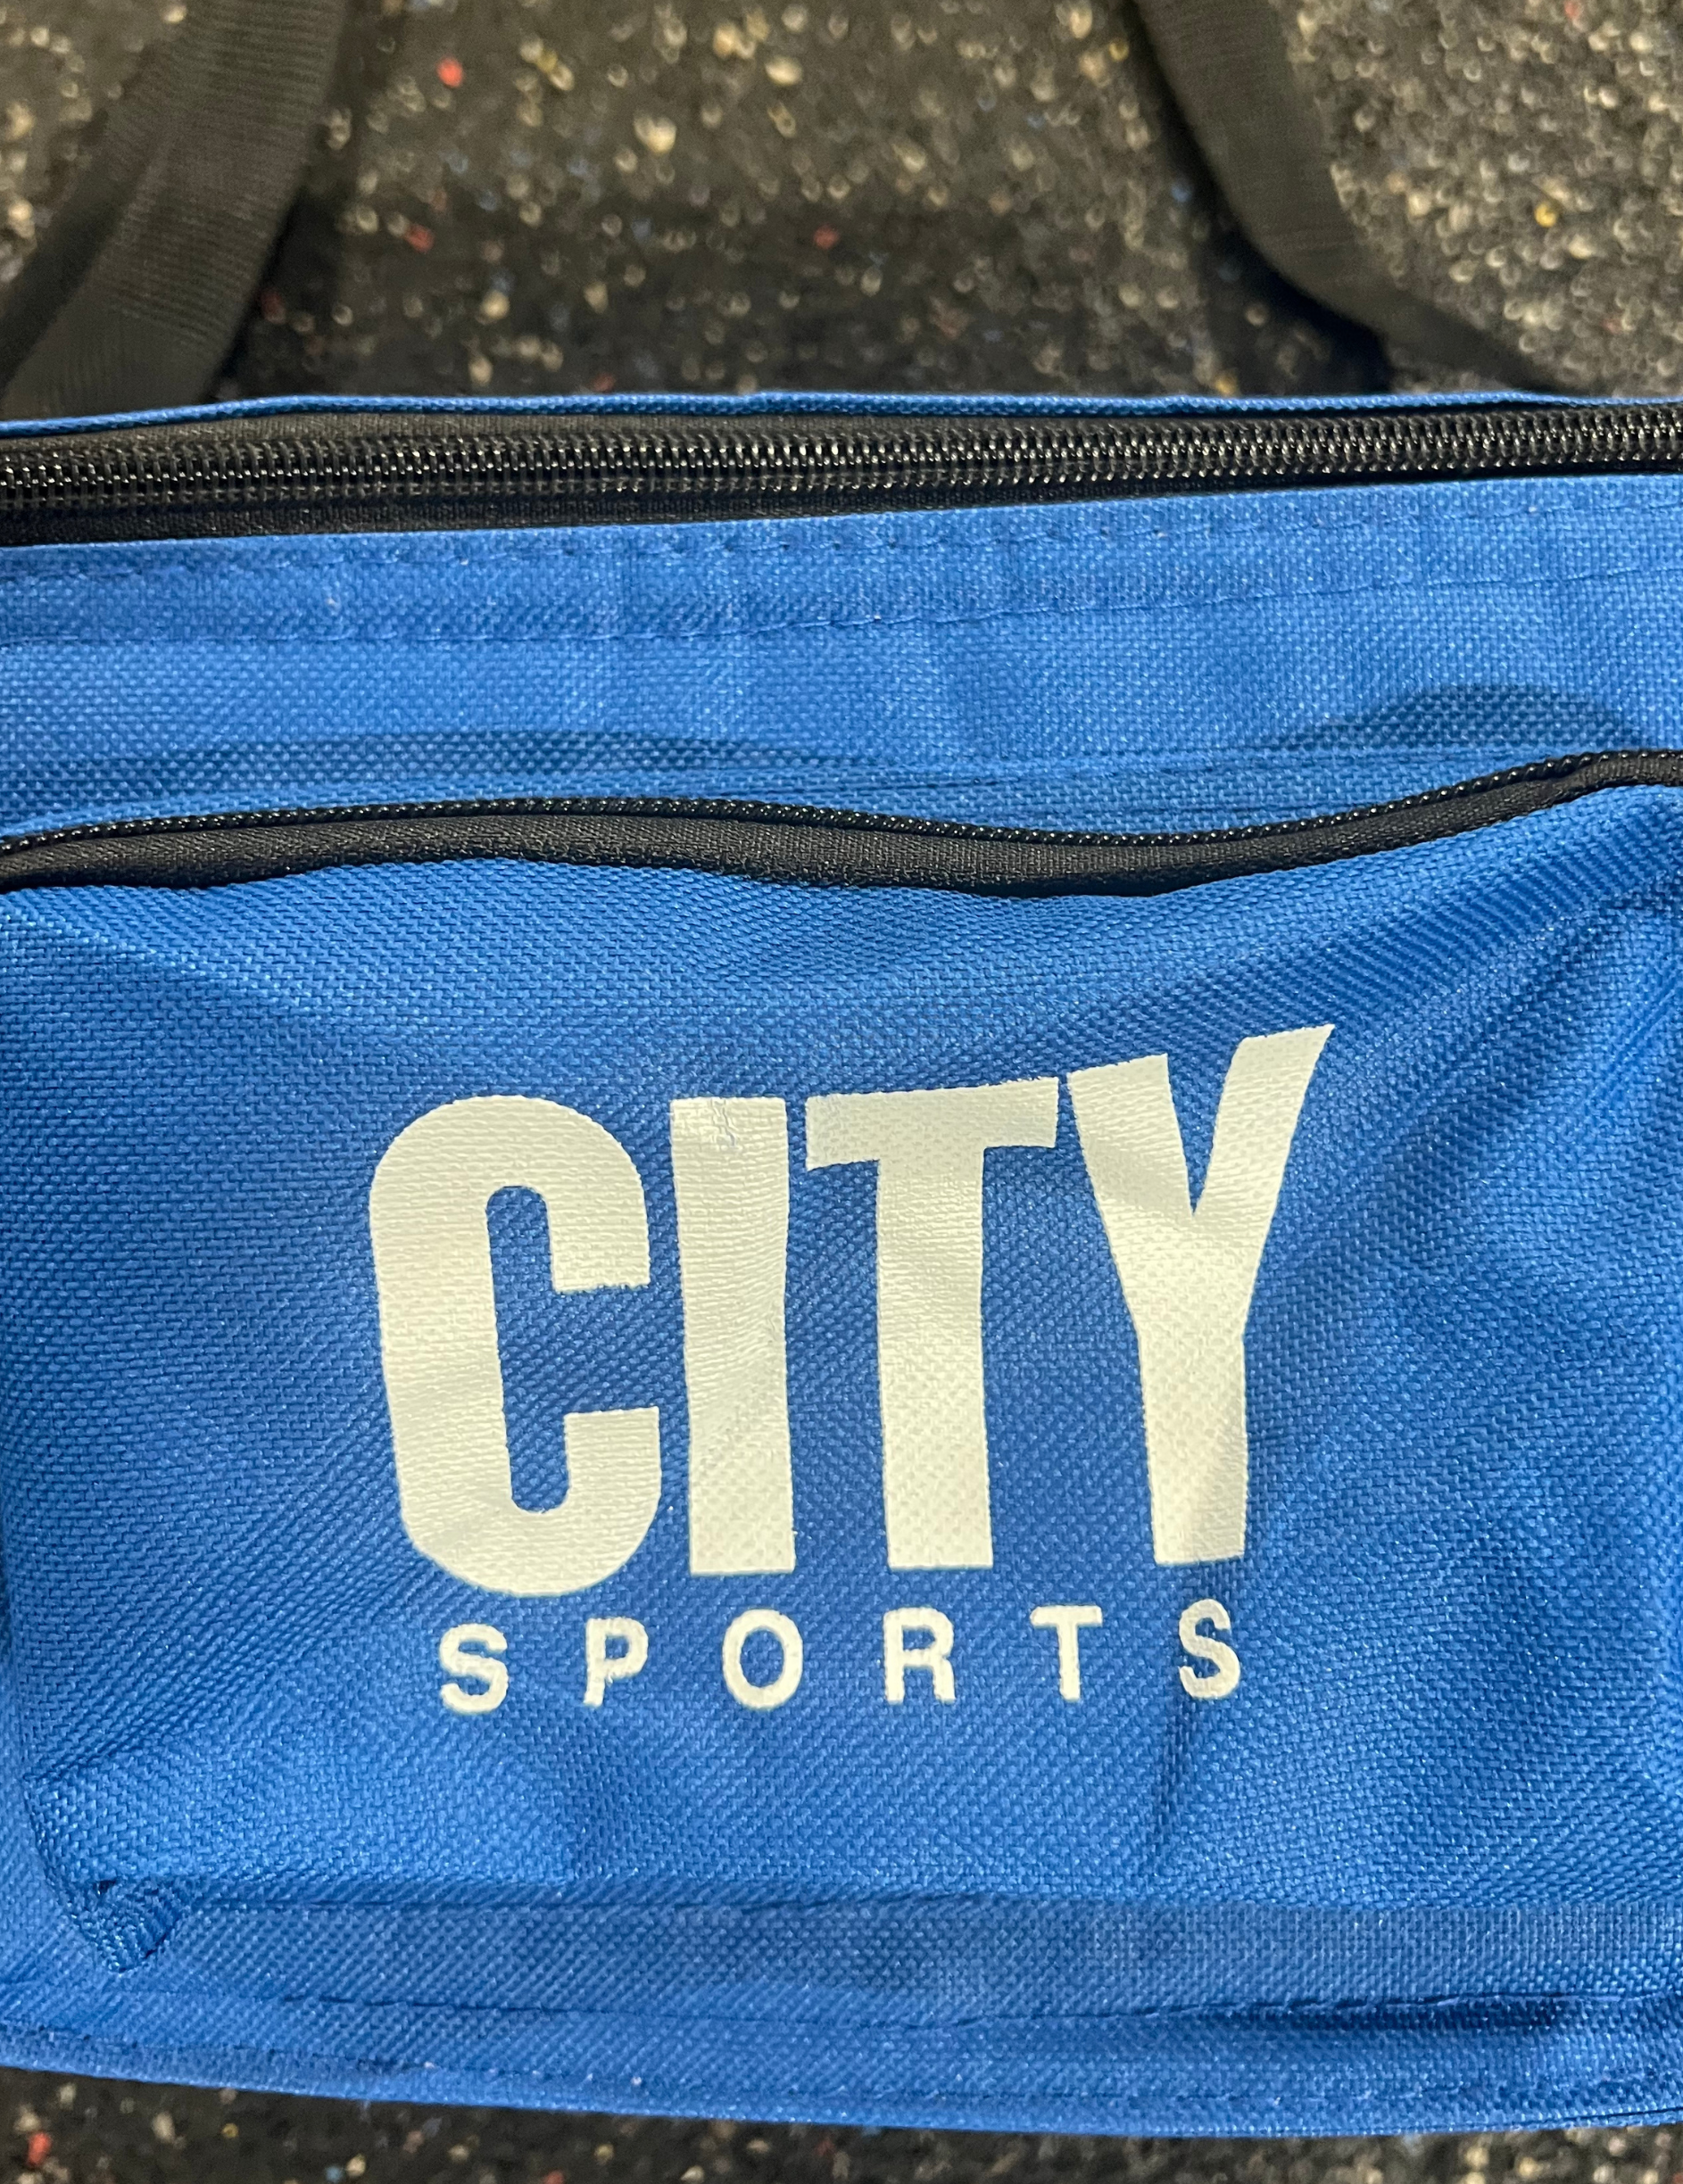 CITY Lunch Insulated Lunch Bag